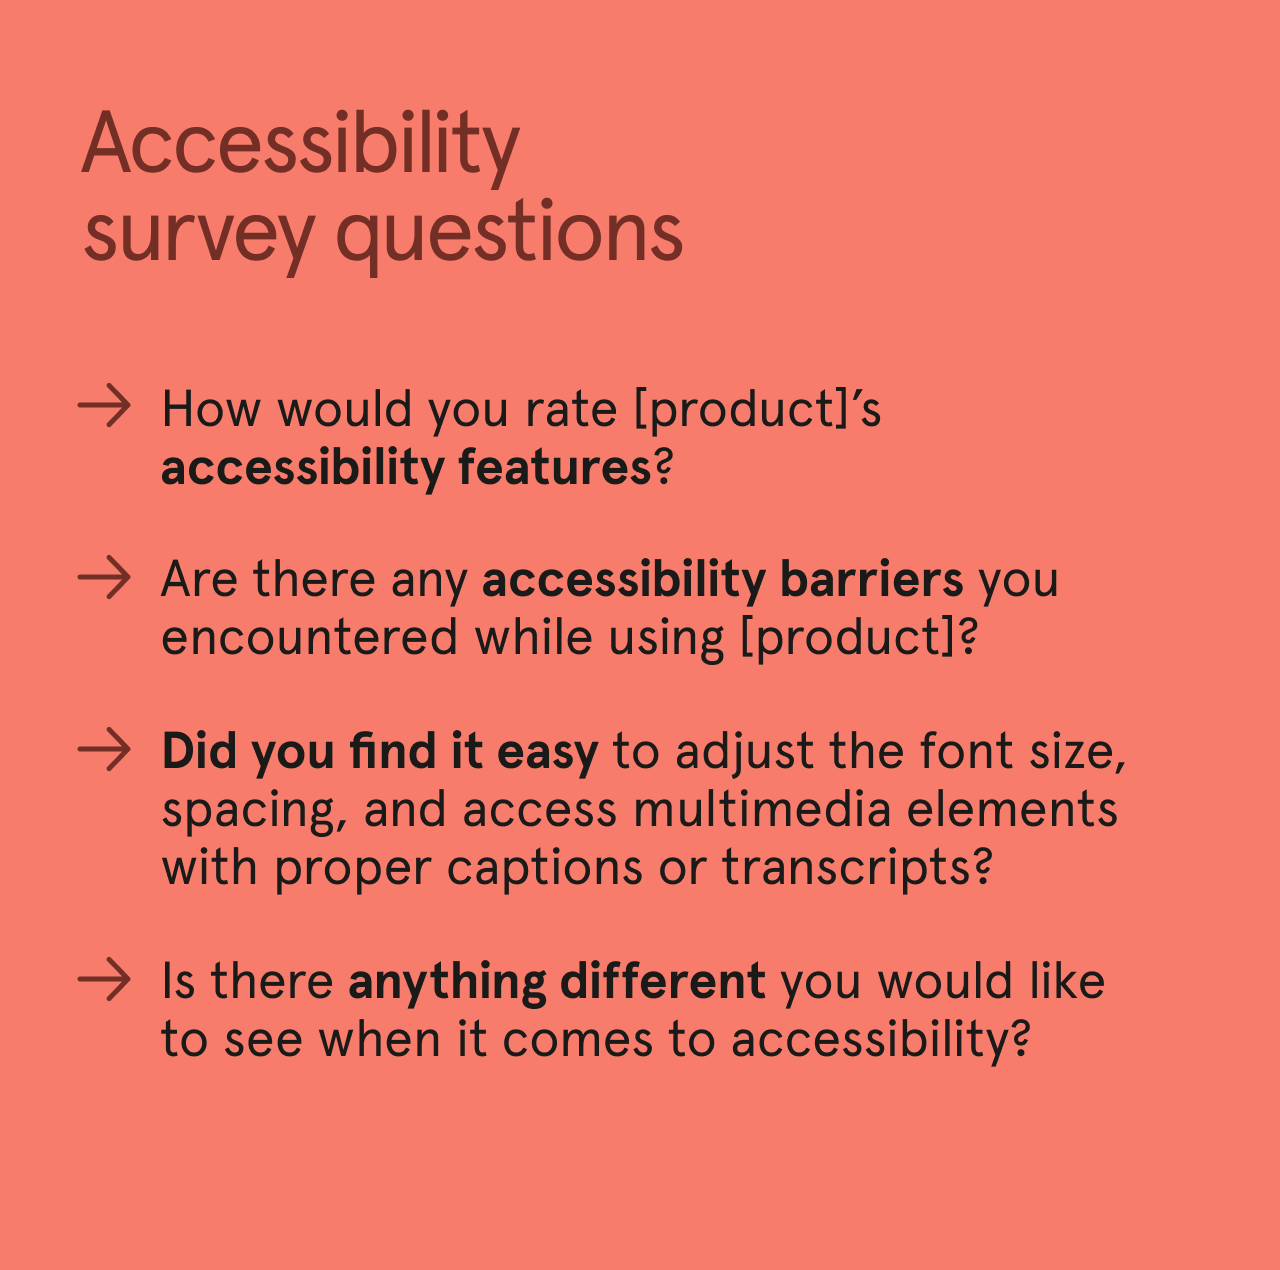 List of accessibility user experience survey questions.